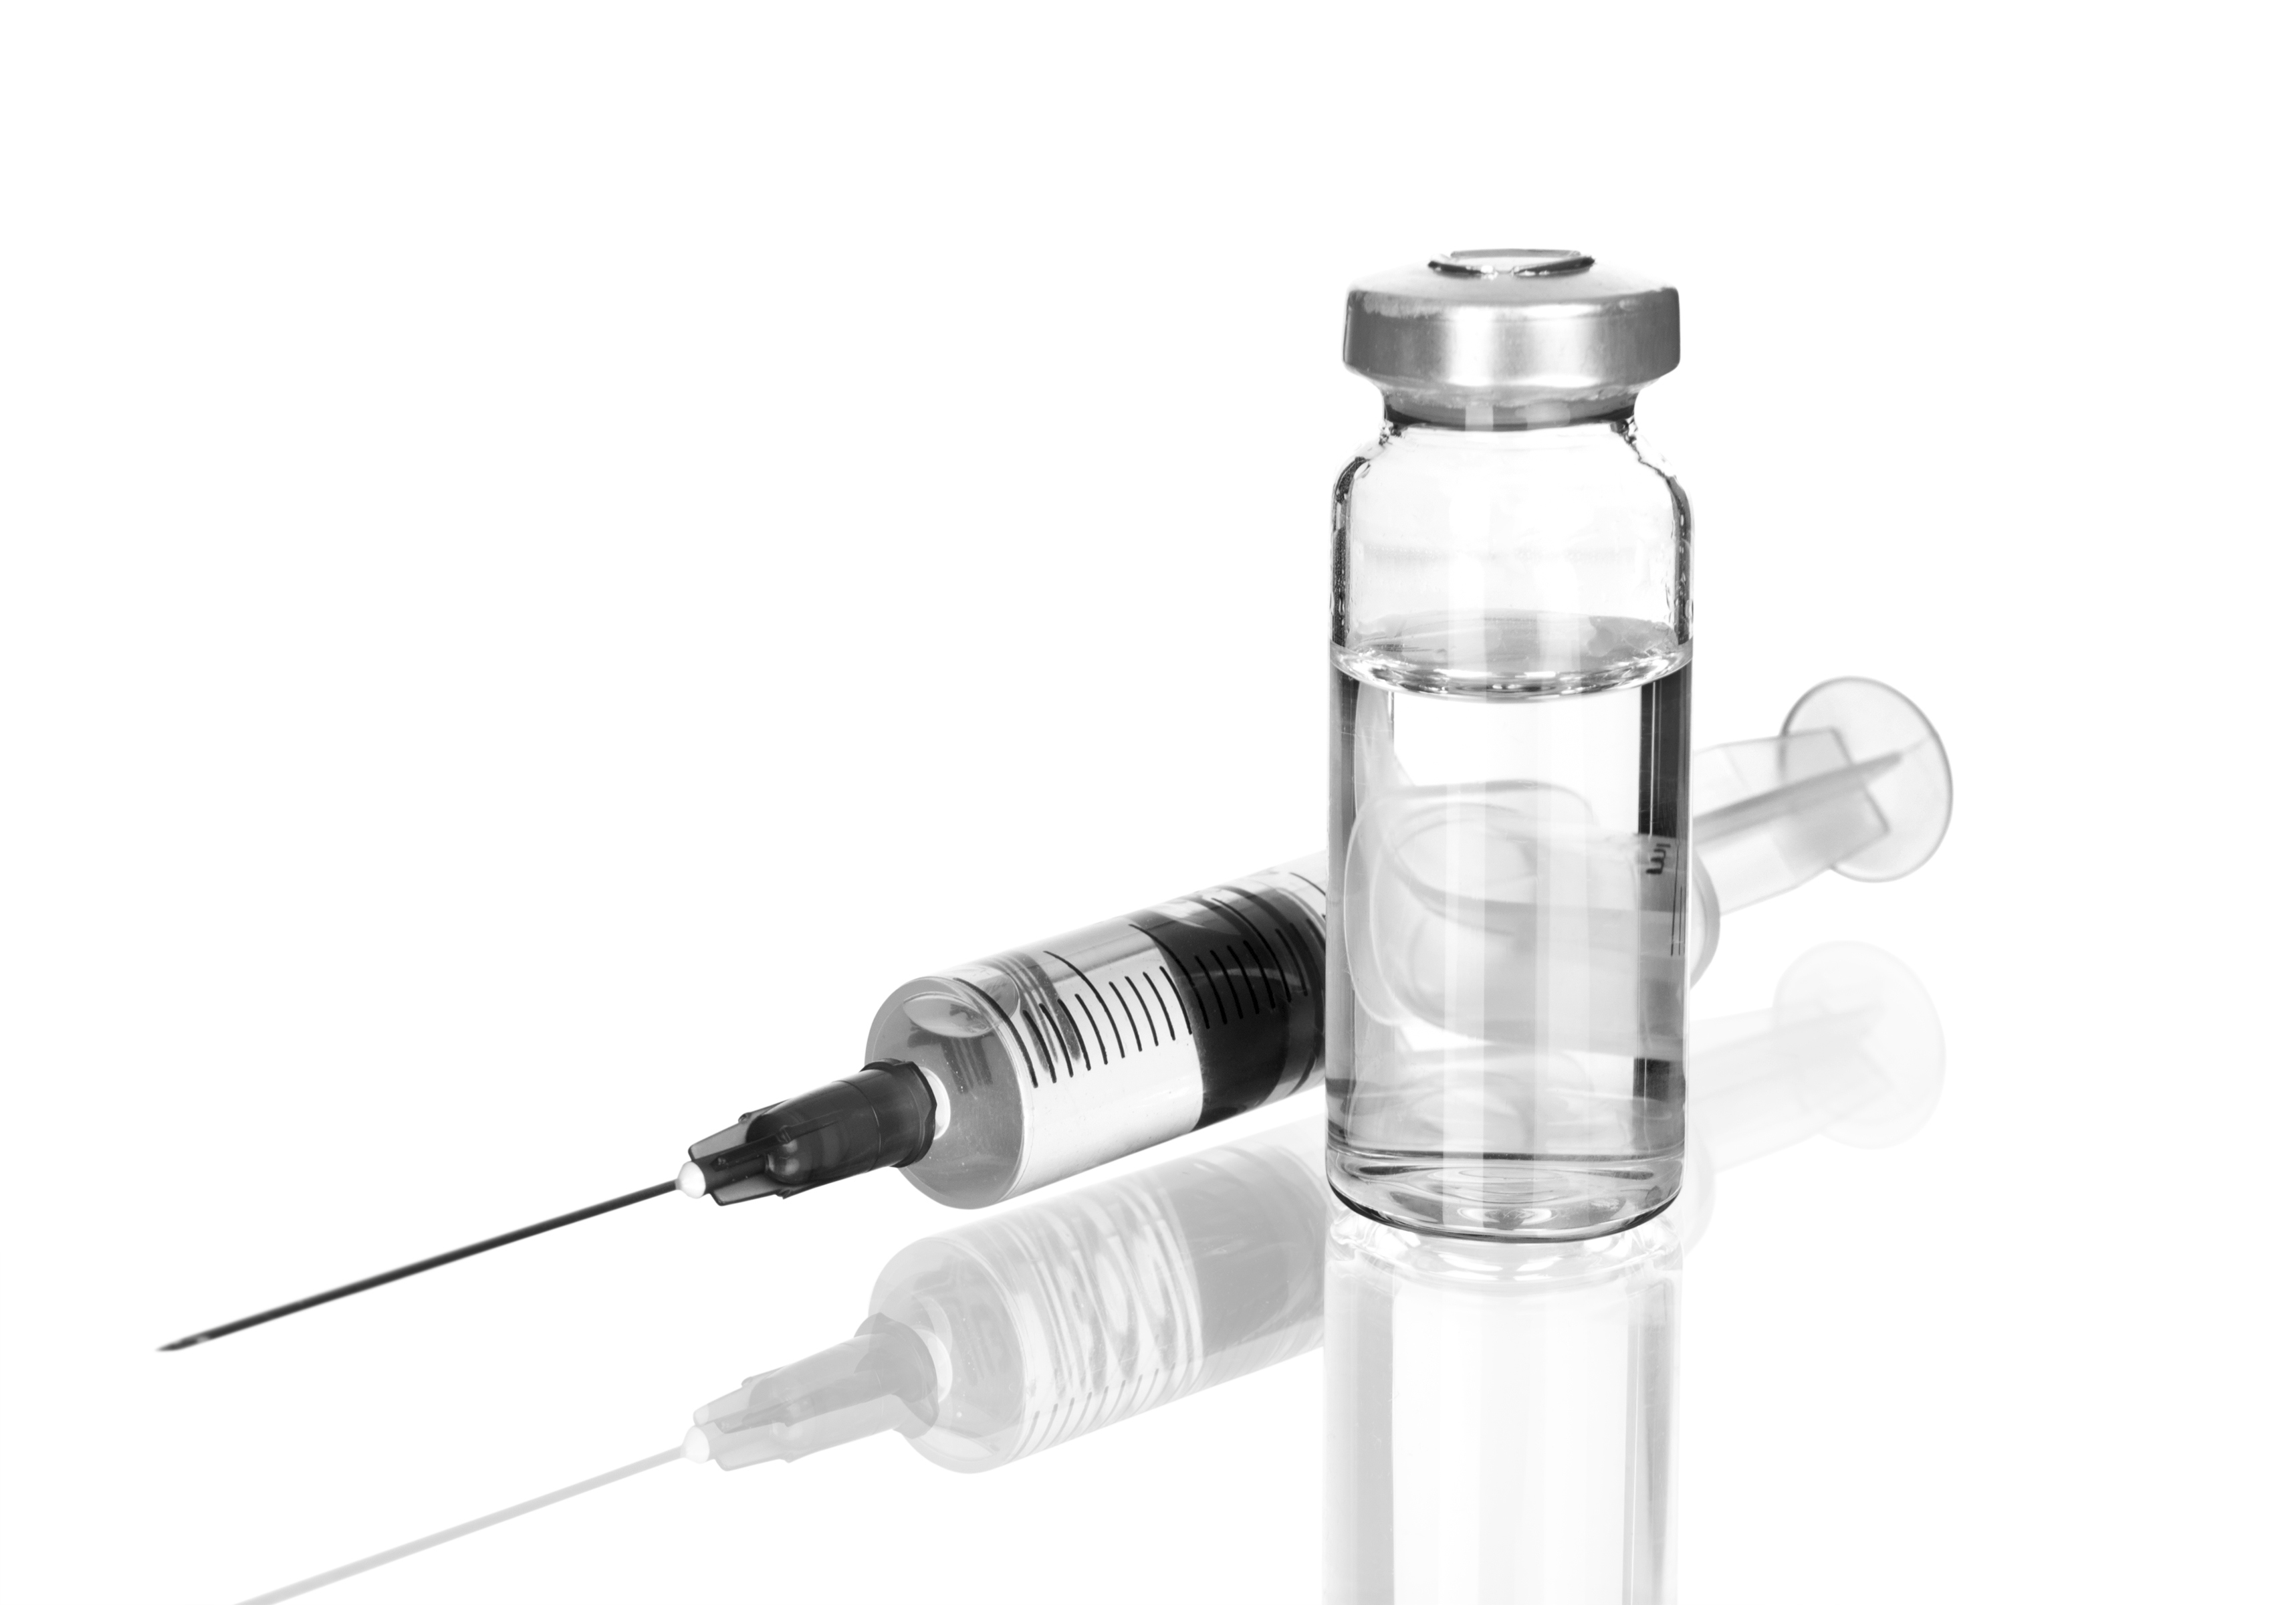 injecting steroids